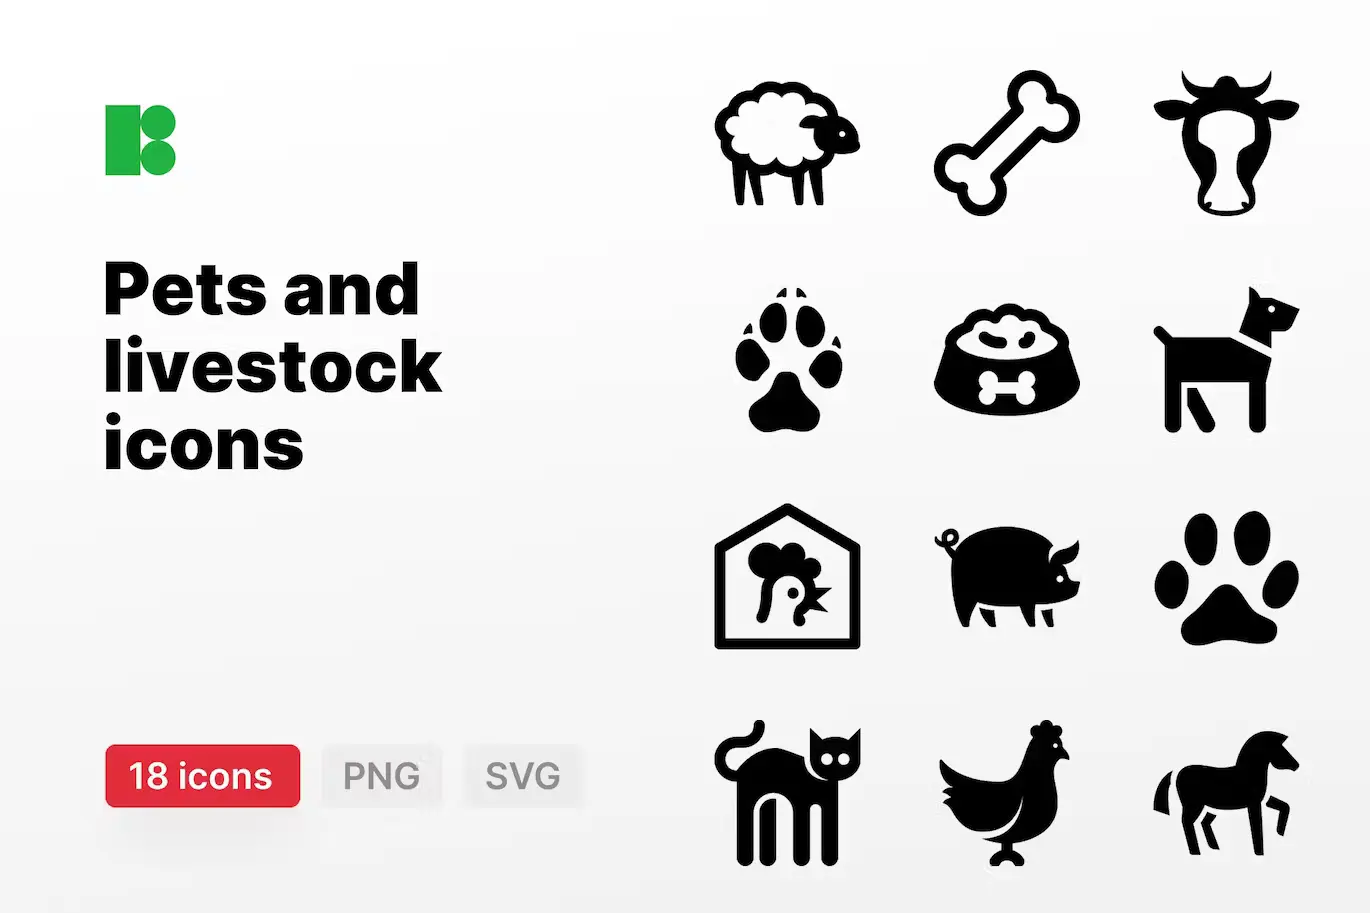 18 Pets and Livestock Icons - PNG and SVG